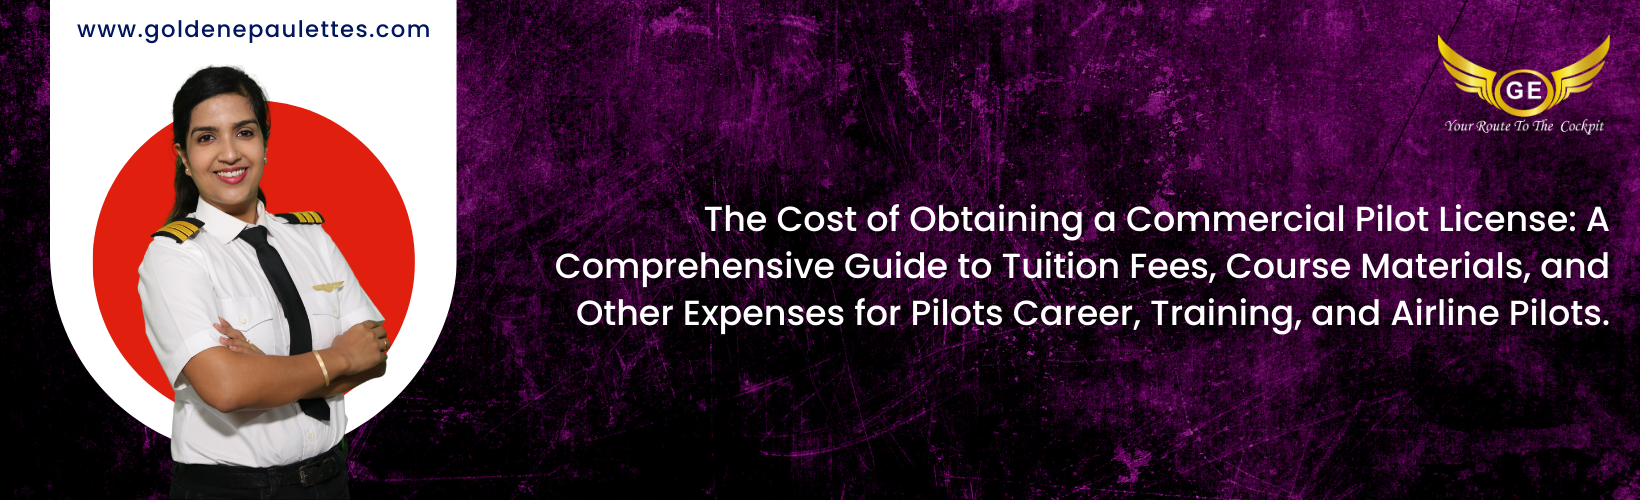 The Cost of Obtaining a Commercial Pilot License